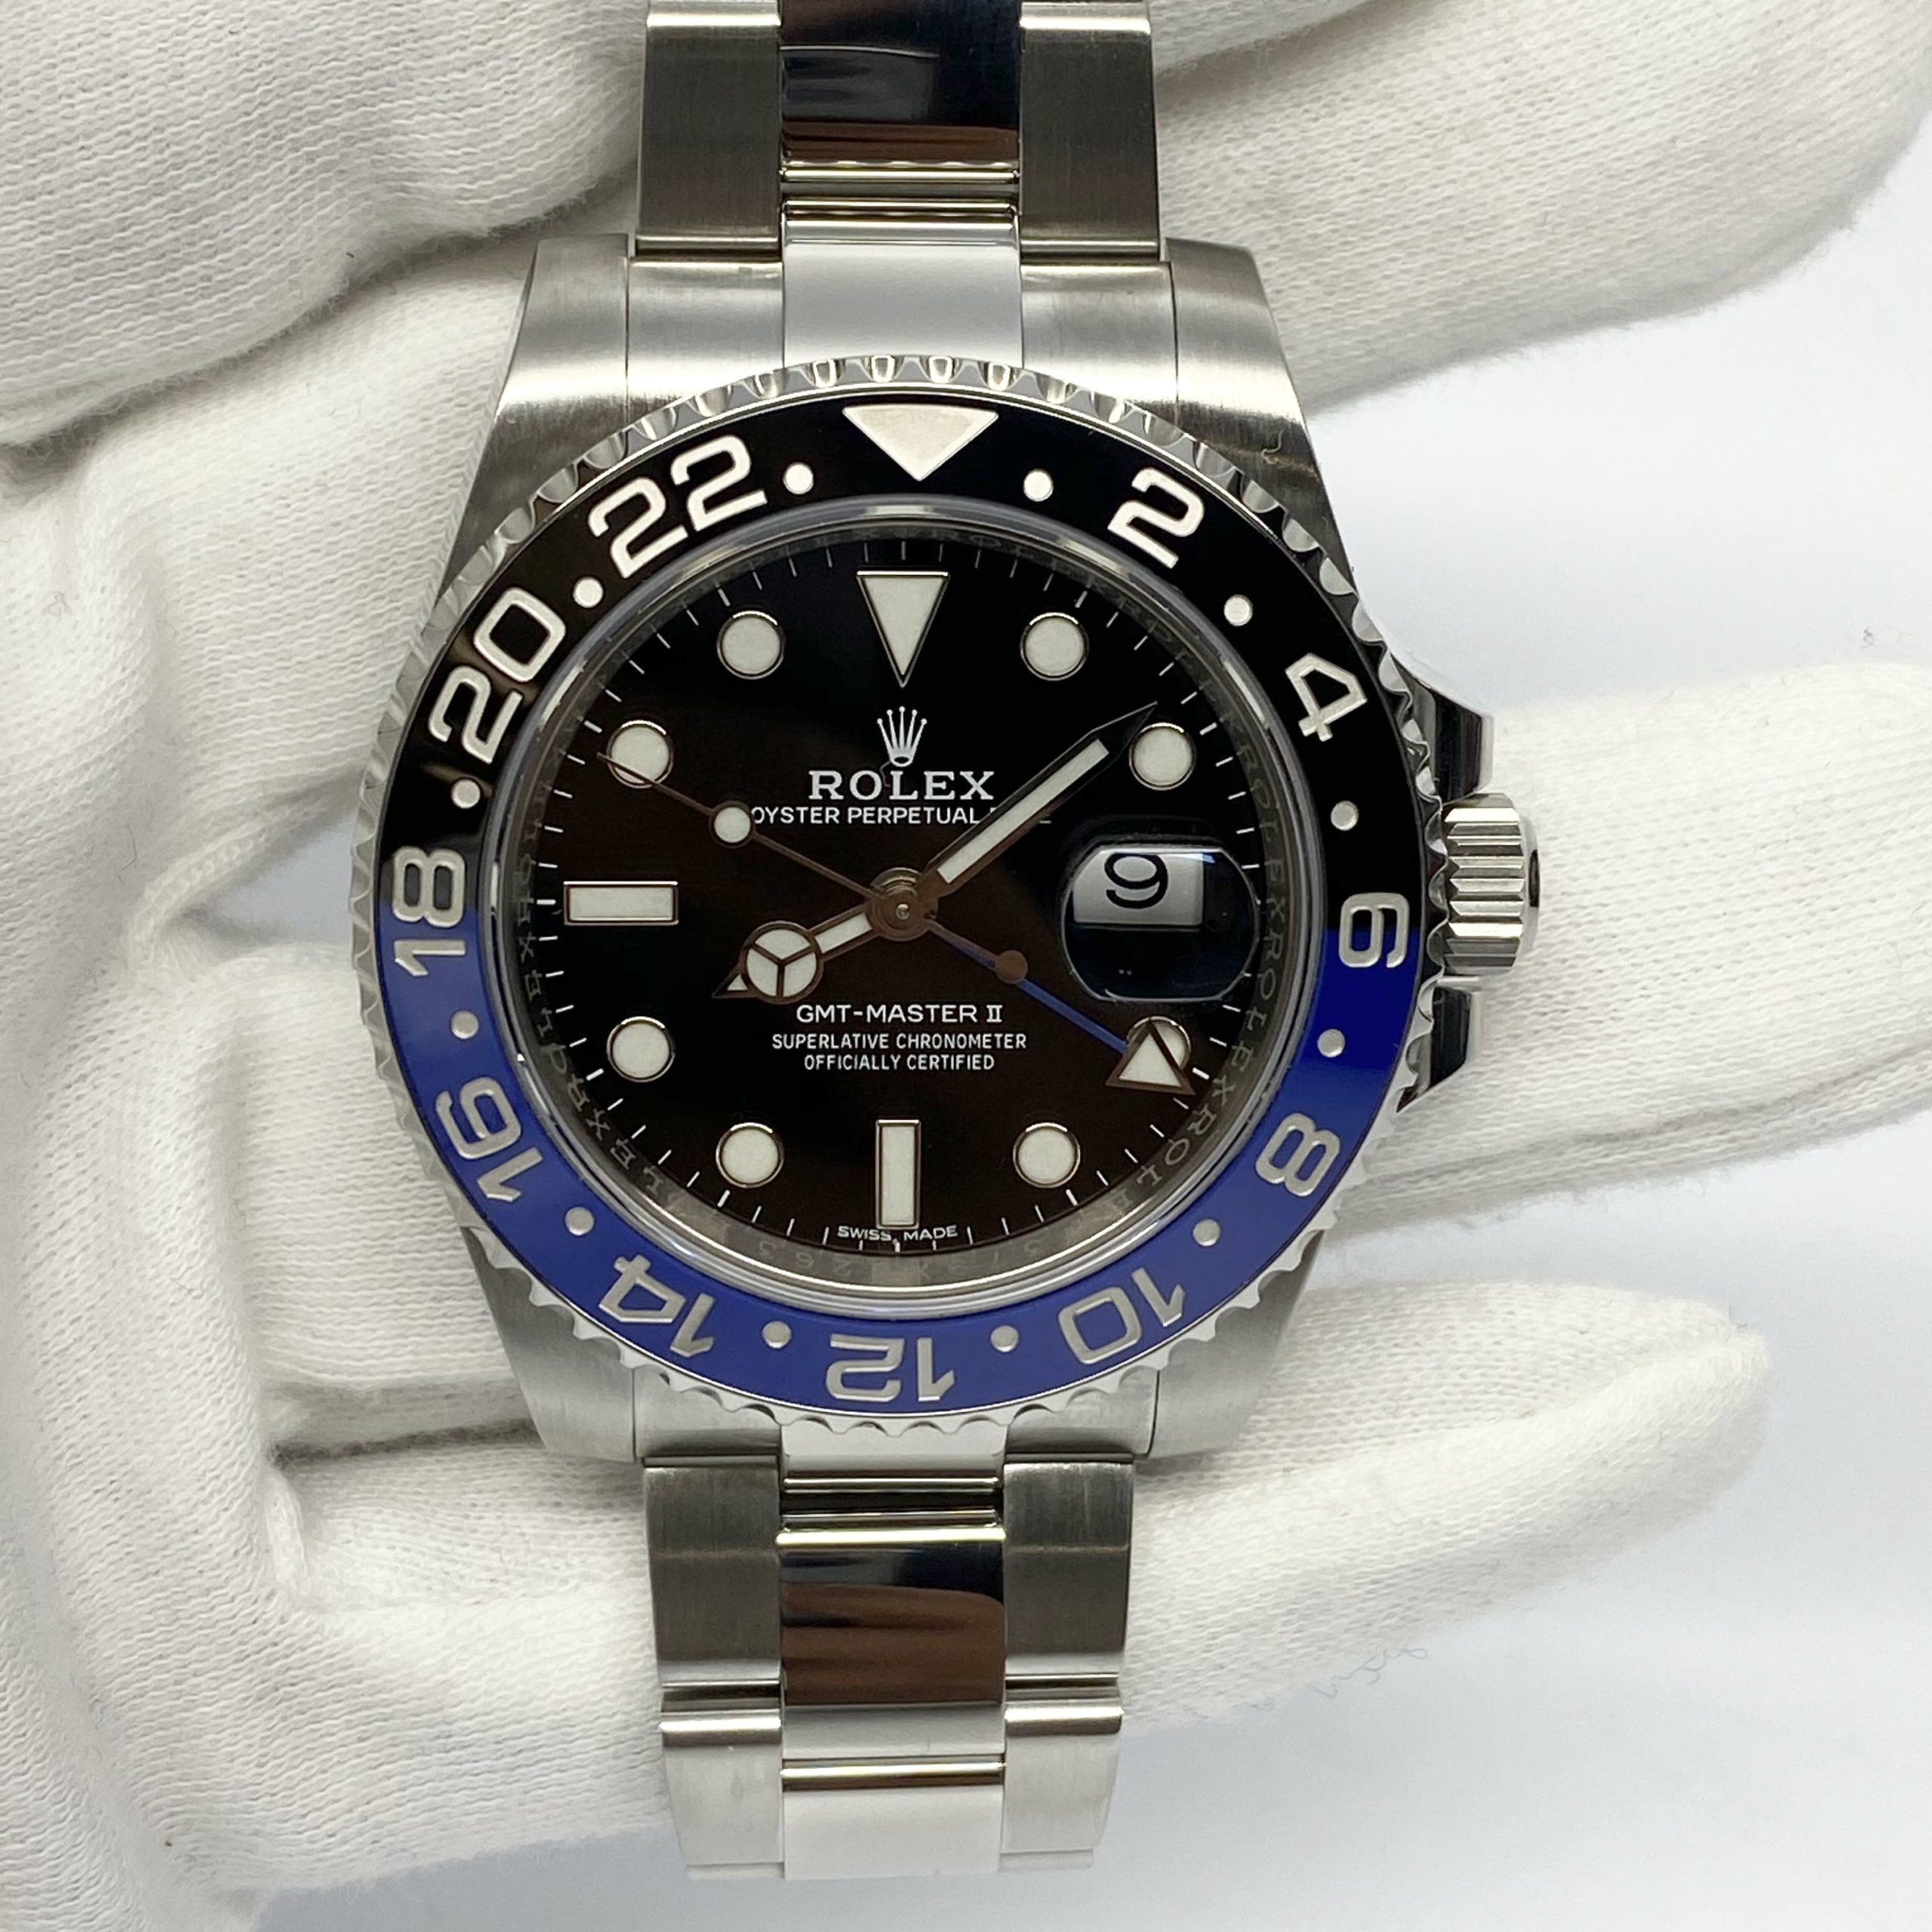 Is The New Rolex Batman A Buy Than The Old One?